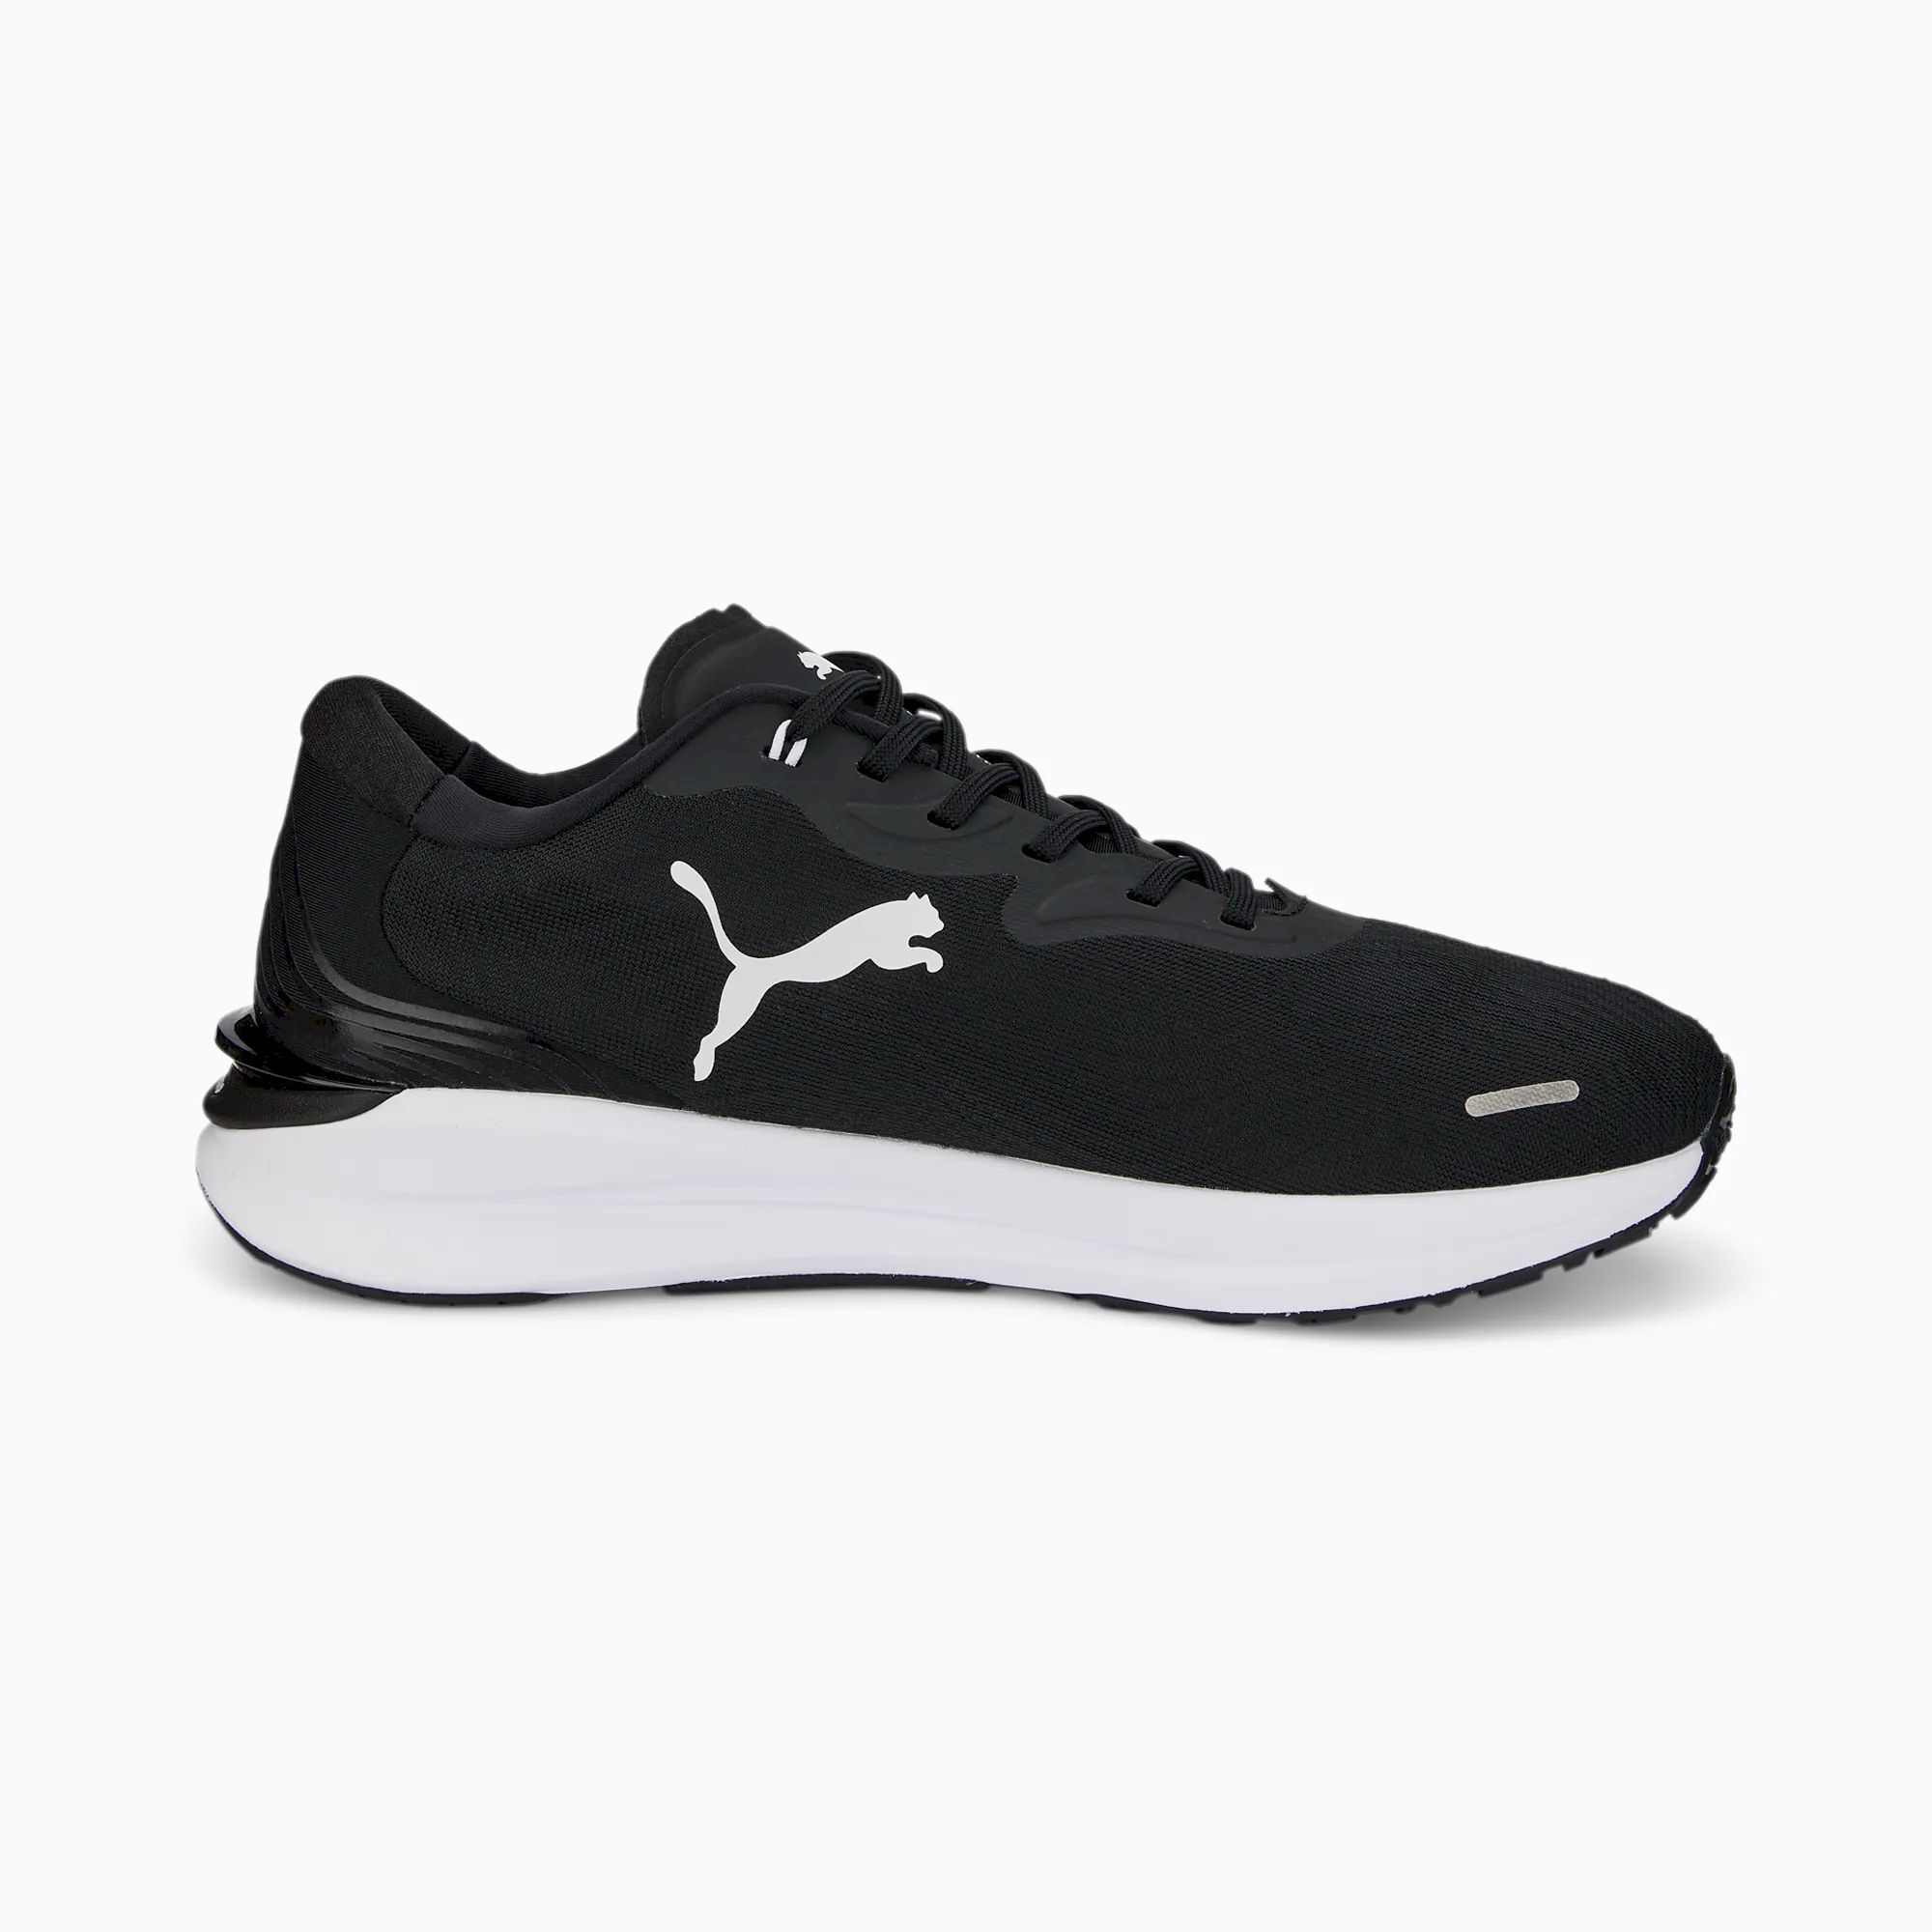 Puma Electrify Nitro 2 - Chaussures running homme | Hardloop